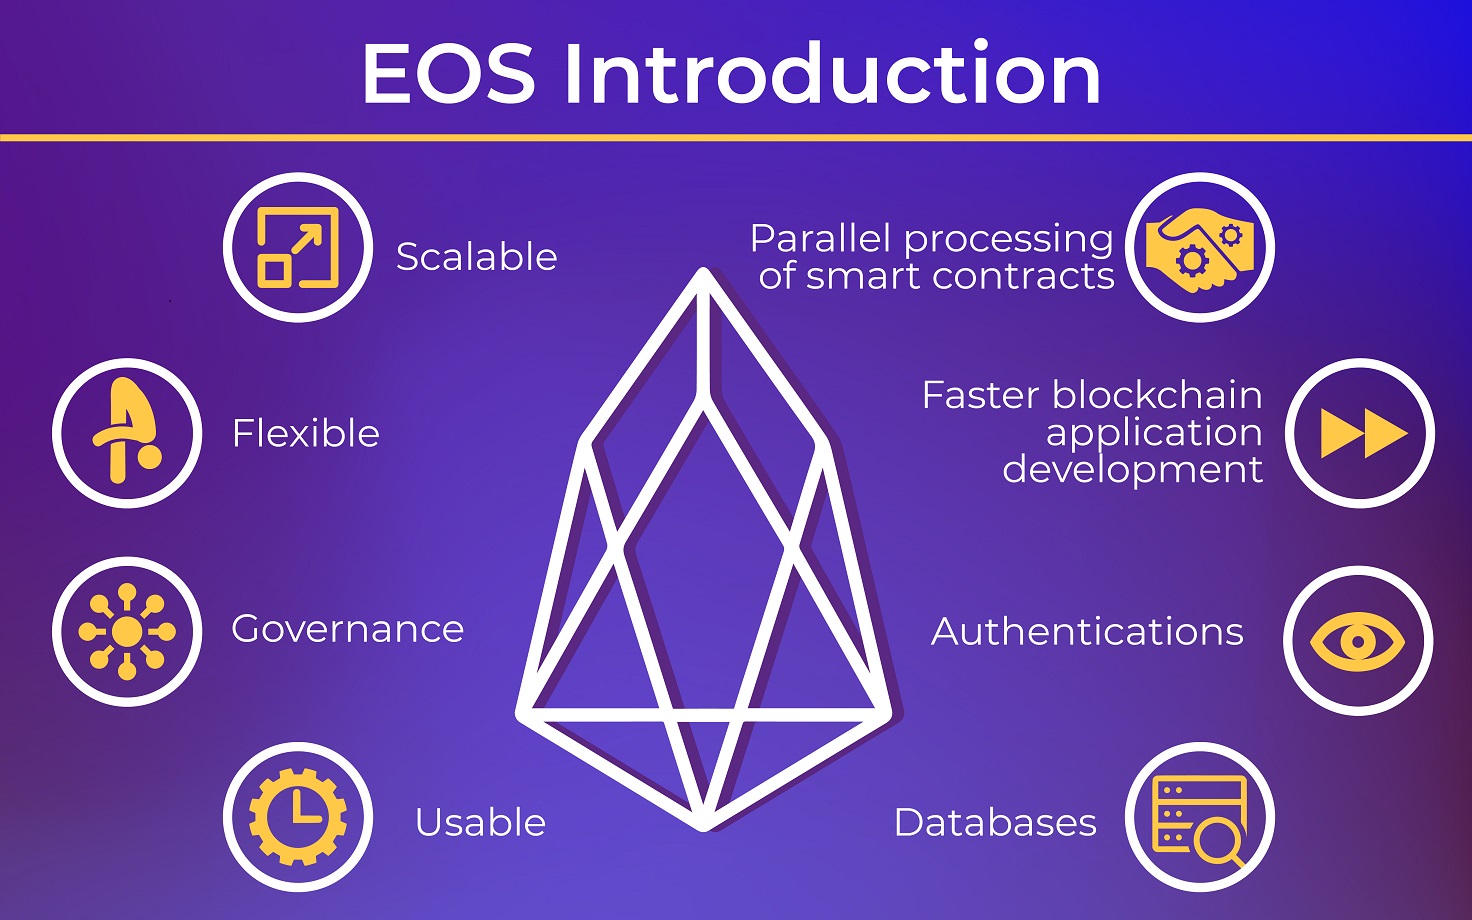 Why EOS is technologically superior?